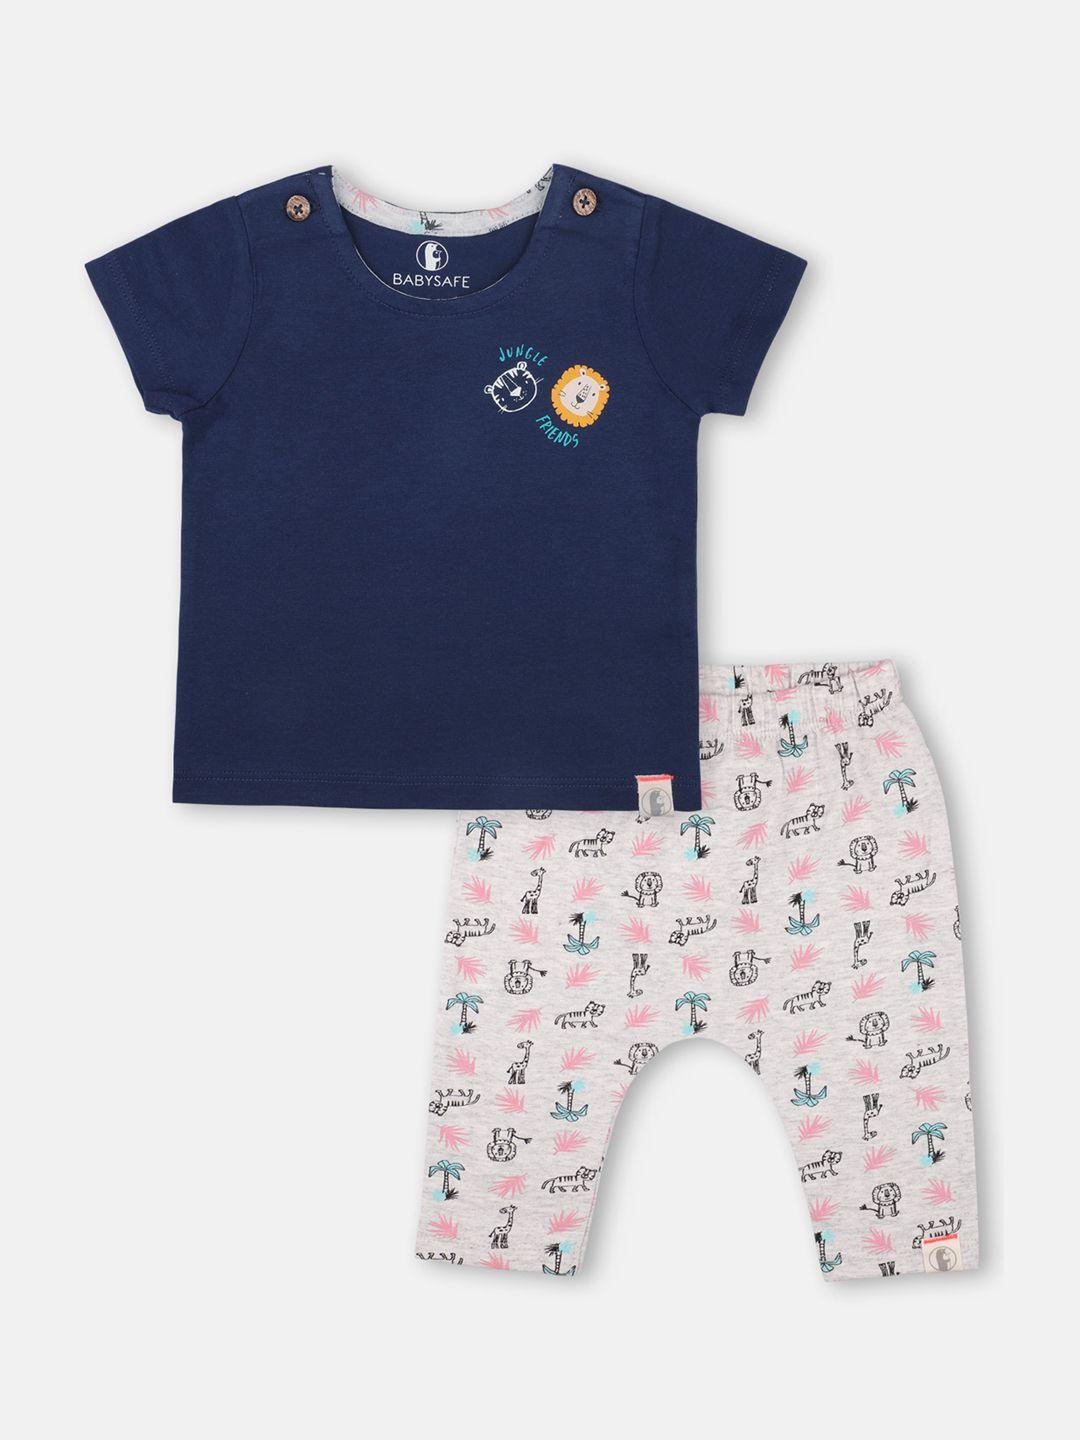 babysafe boys navy blue & off-white solid t-shirt with pyjamas